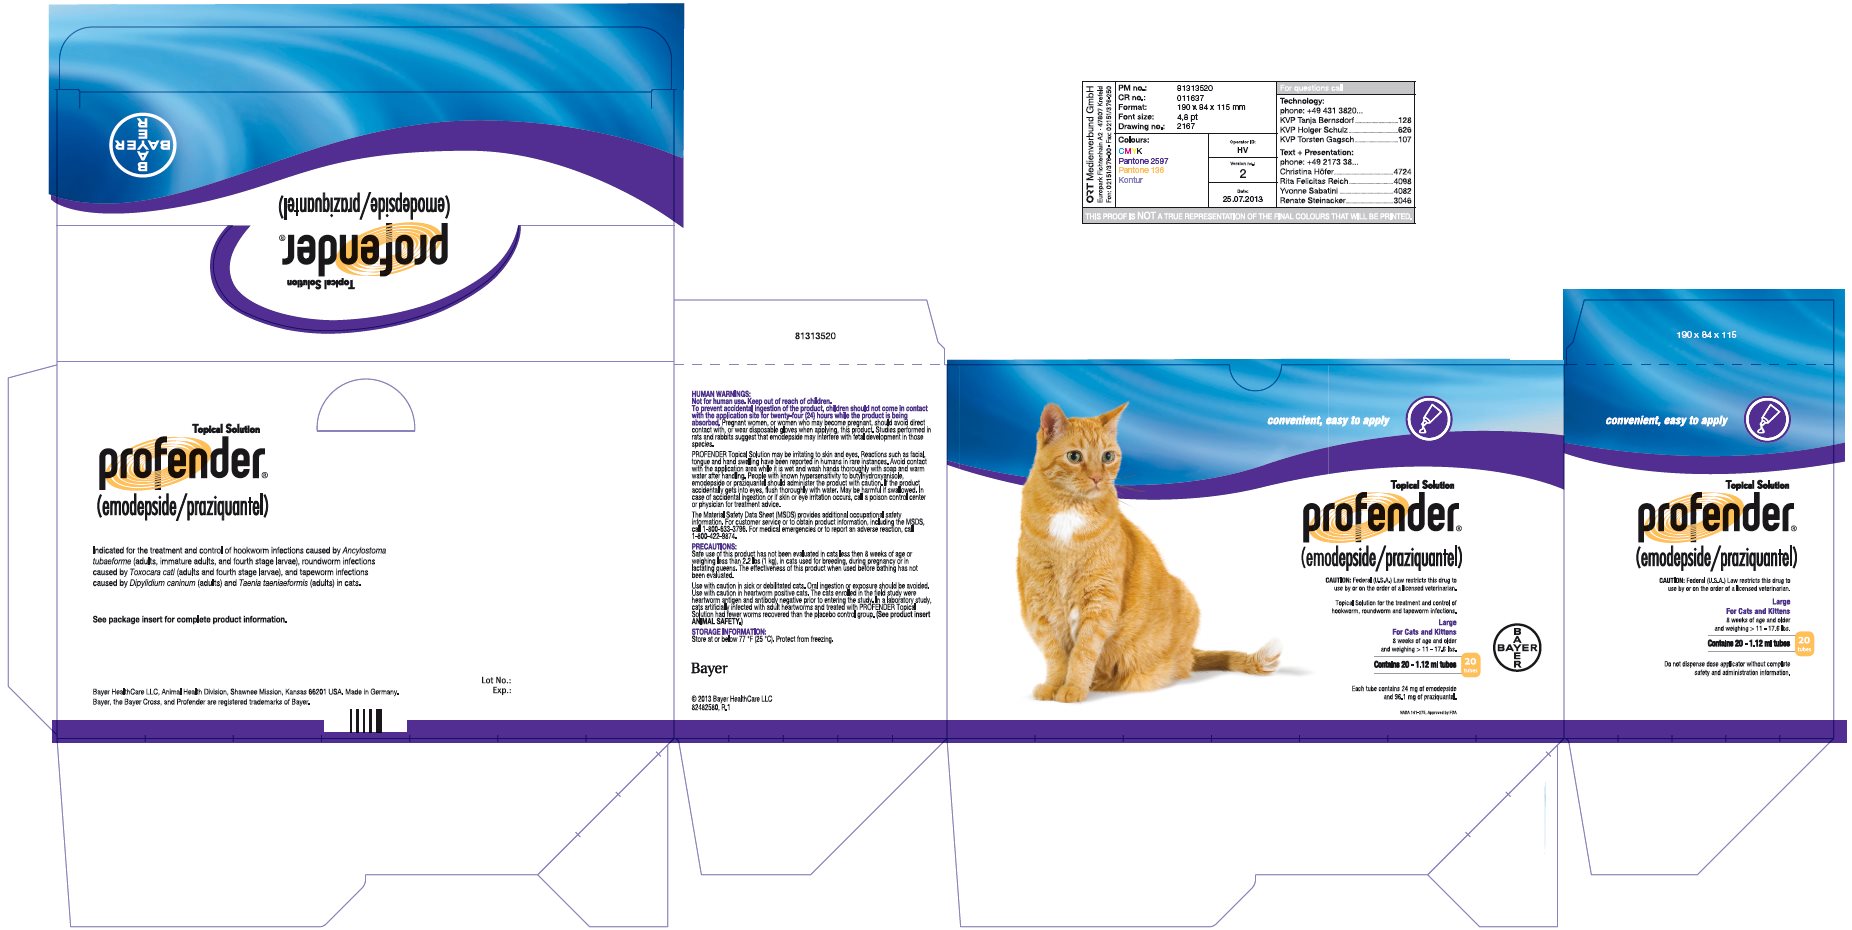 Profender (emodepside/praziquantel) Topical Solution for large cats and kittens (> 11 - 17.6 lbs) 20 (1.12 ml) tubes label